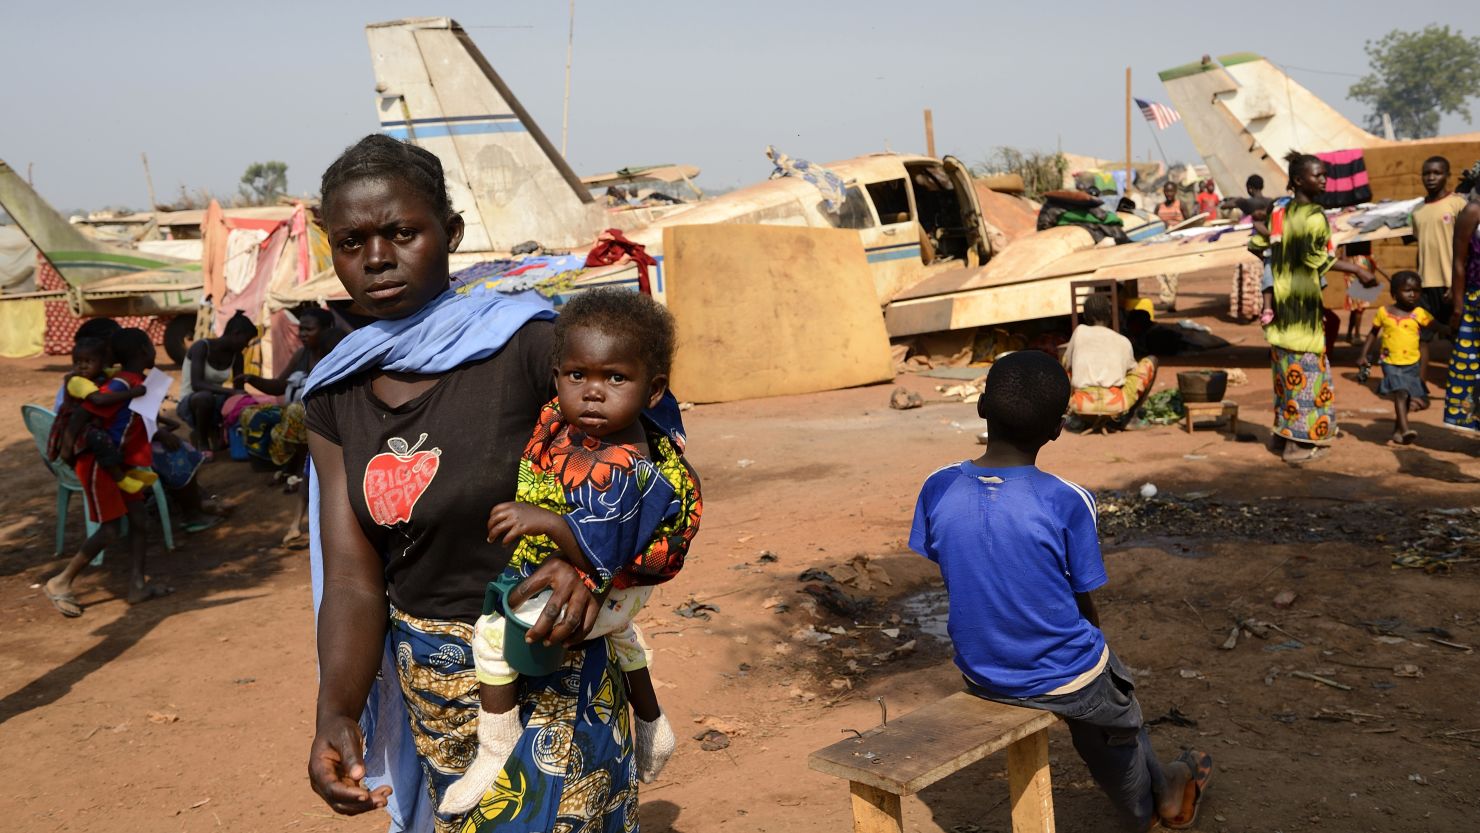 The U.N. estimates more than half the population of the Central African Republic has been affected by the humanitarian crisis.